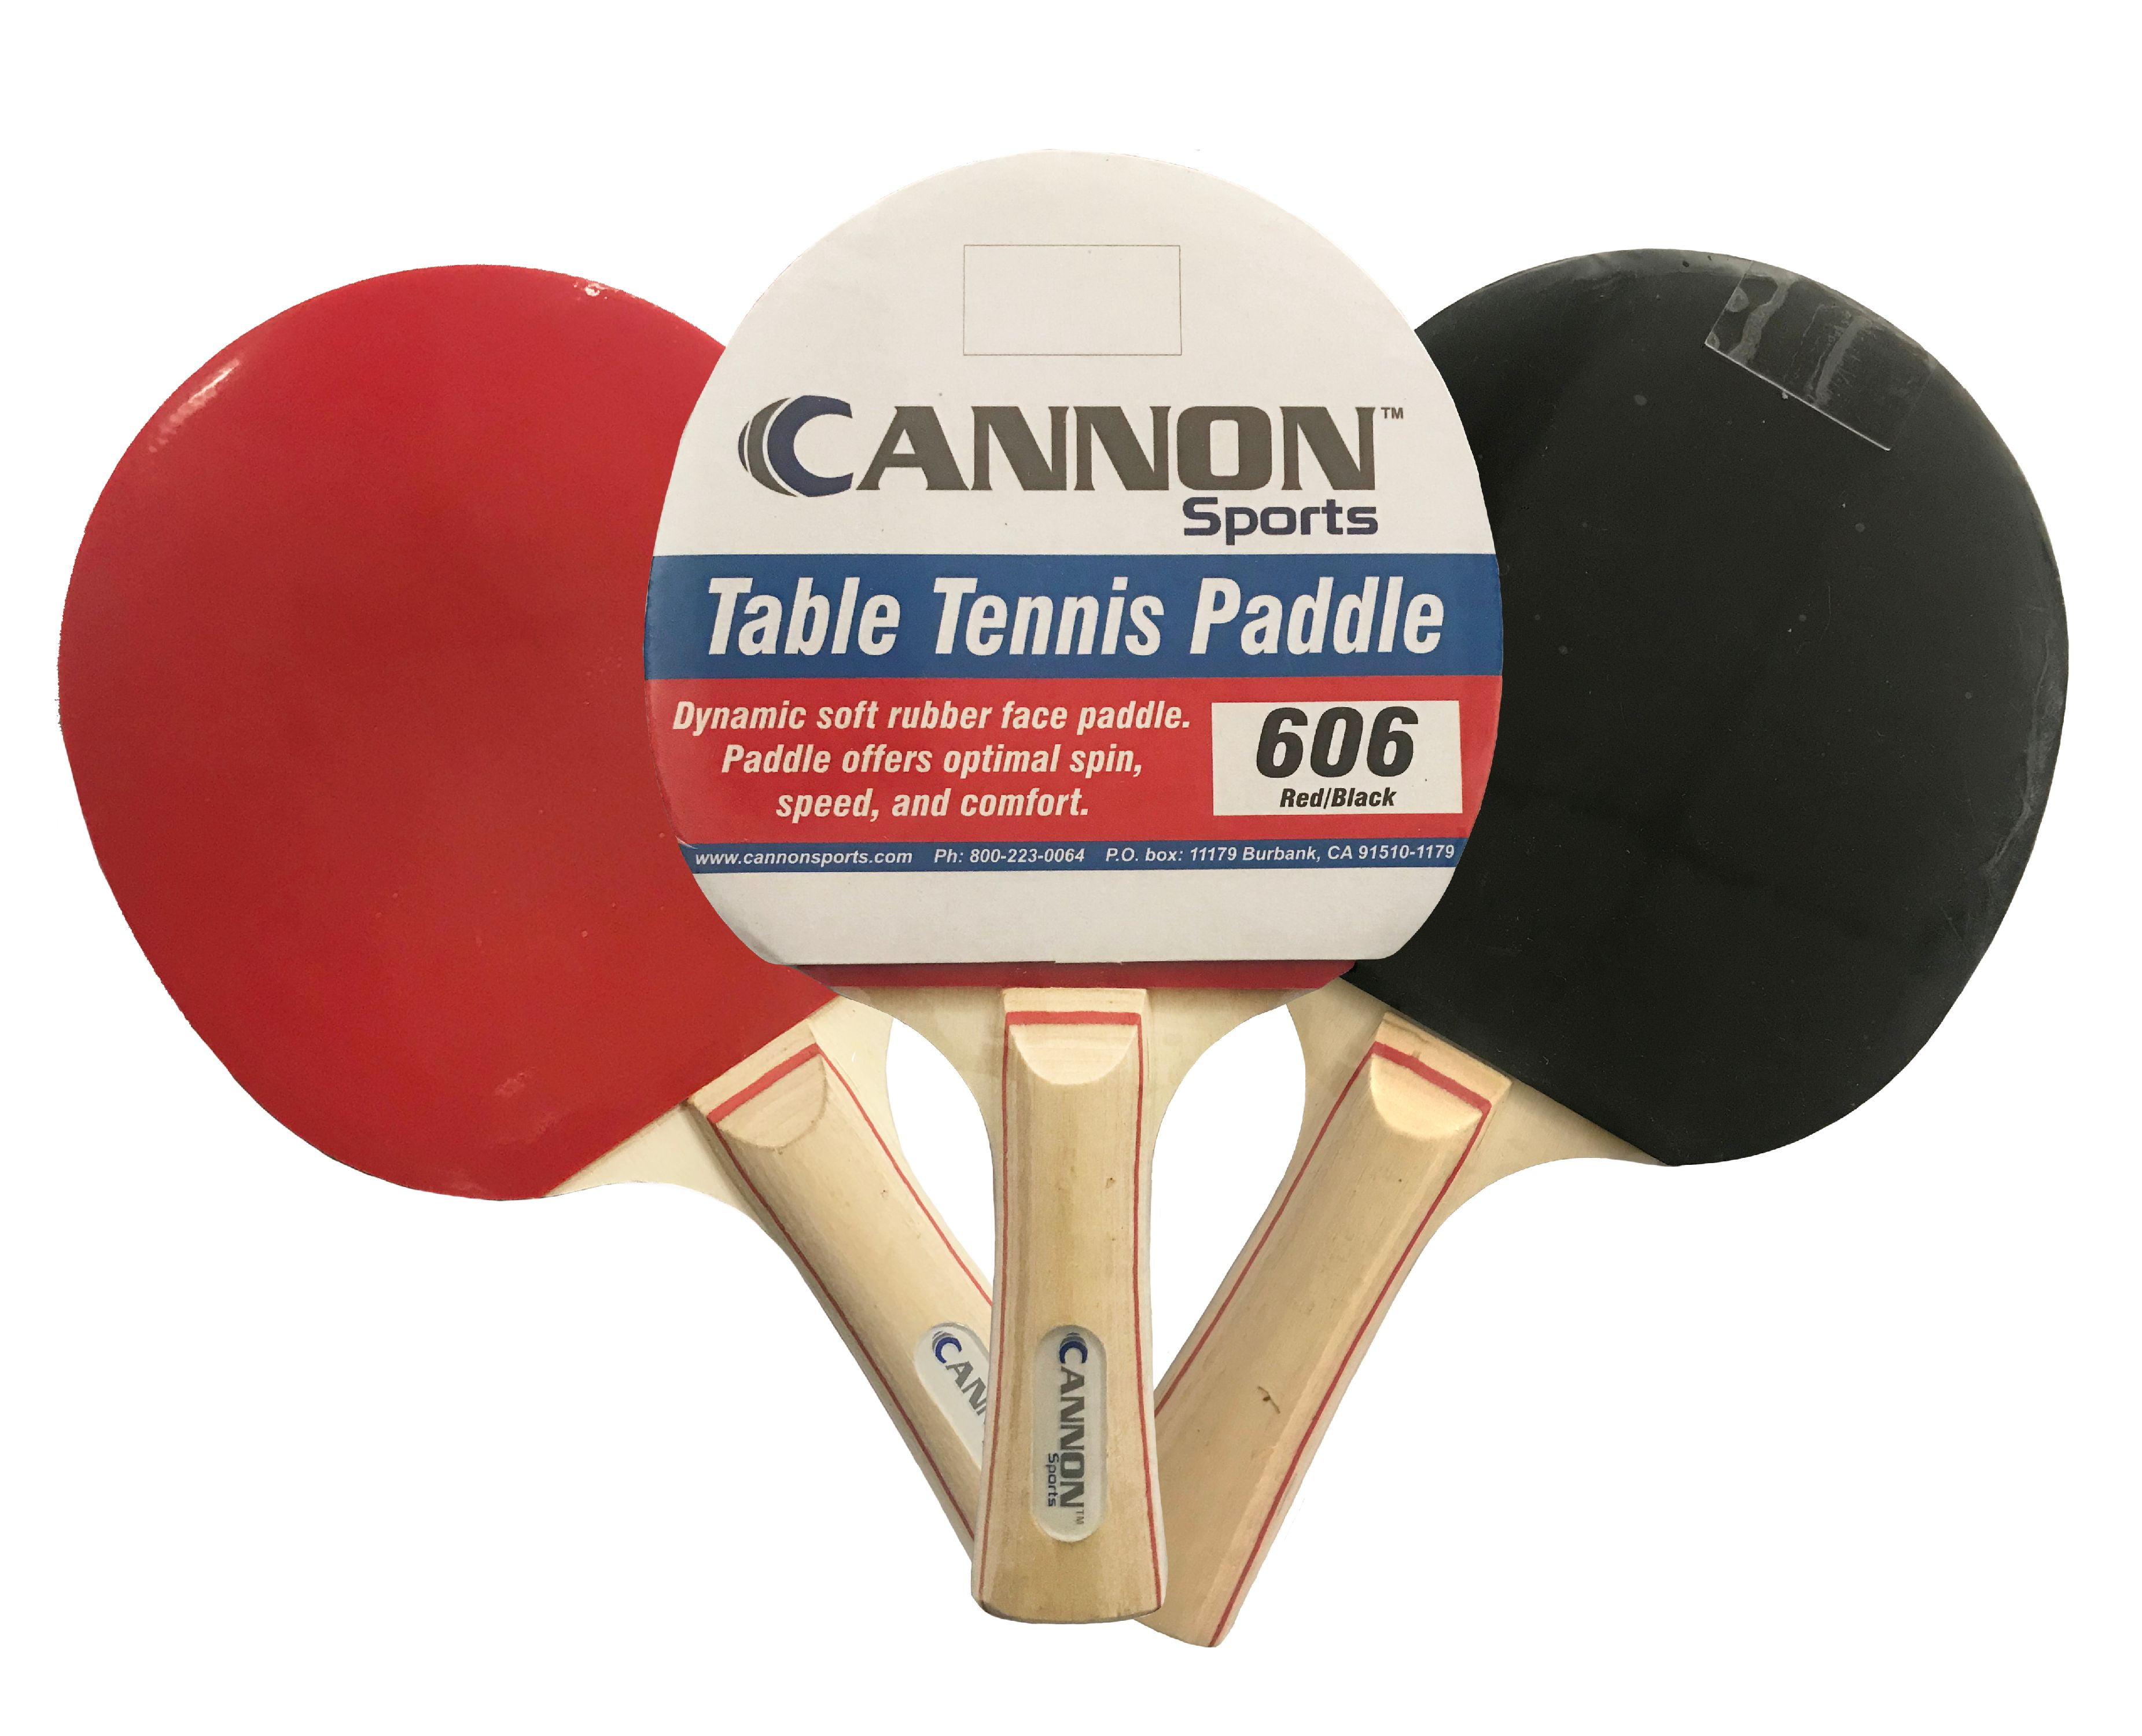 Cannon Sports Table Tennis Paddle Soft Rubber Face, Red/Black